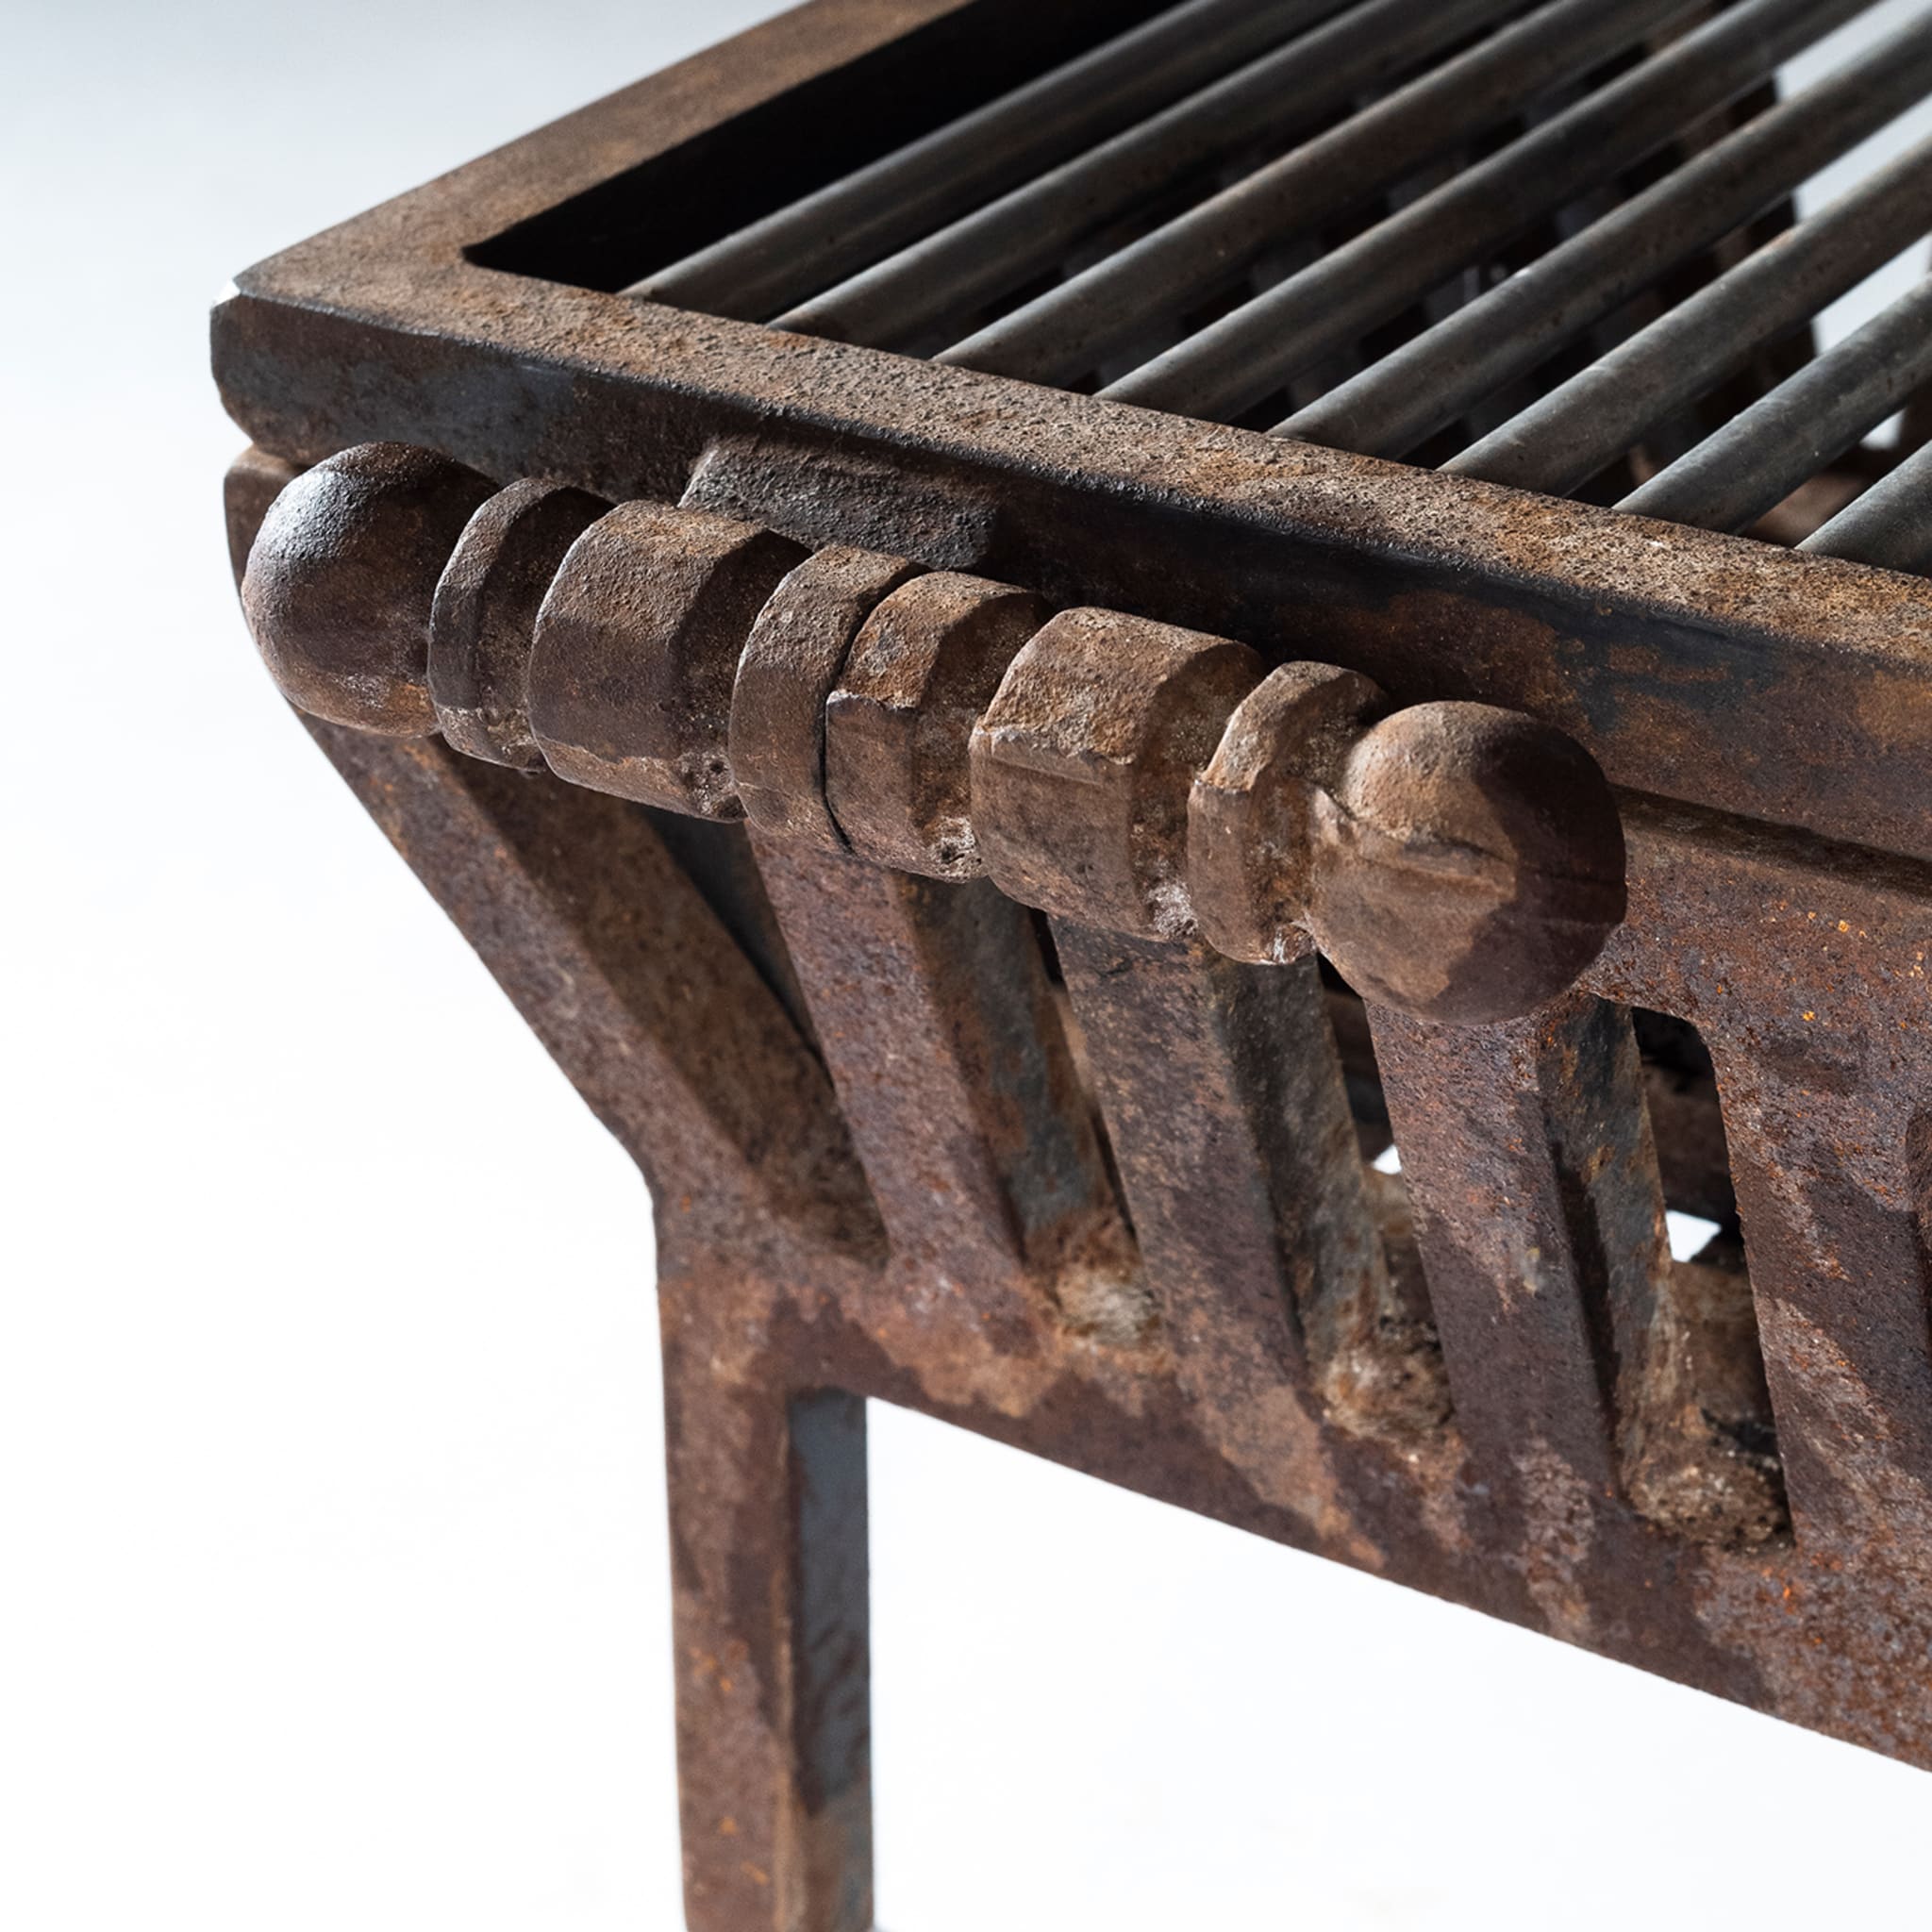 The BBQ Fire Grate - Alternative view 2